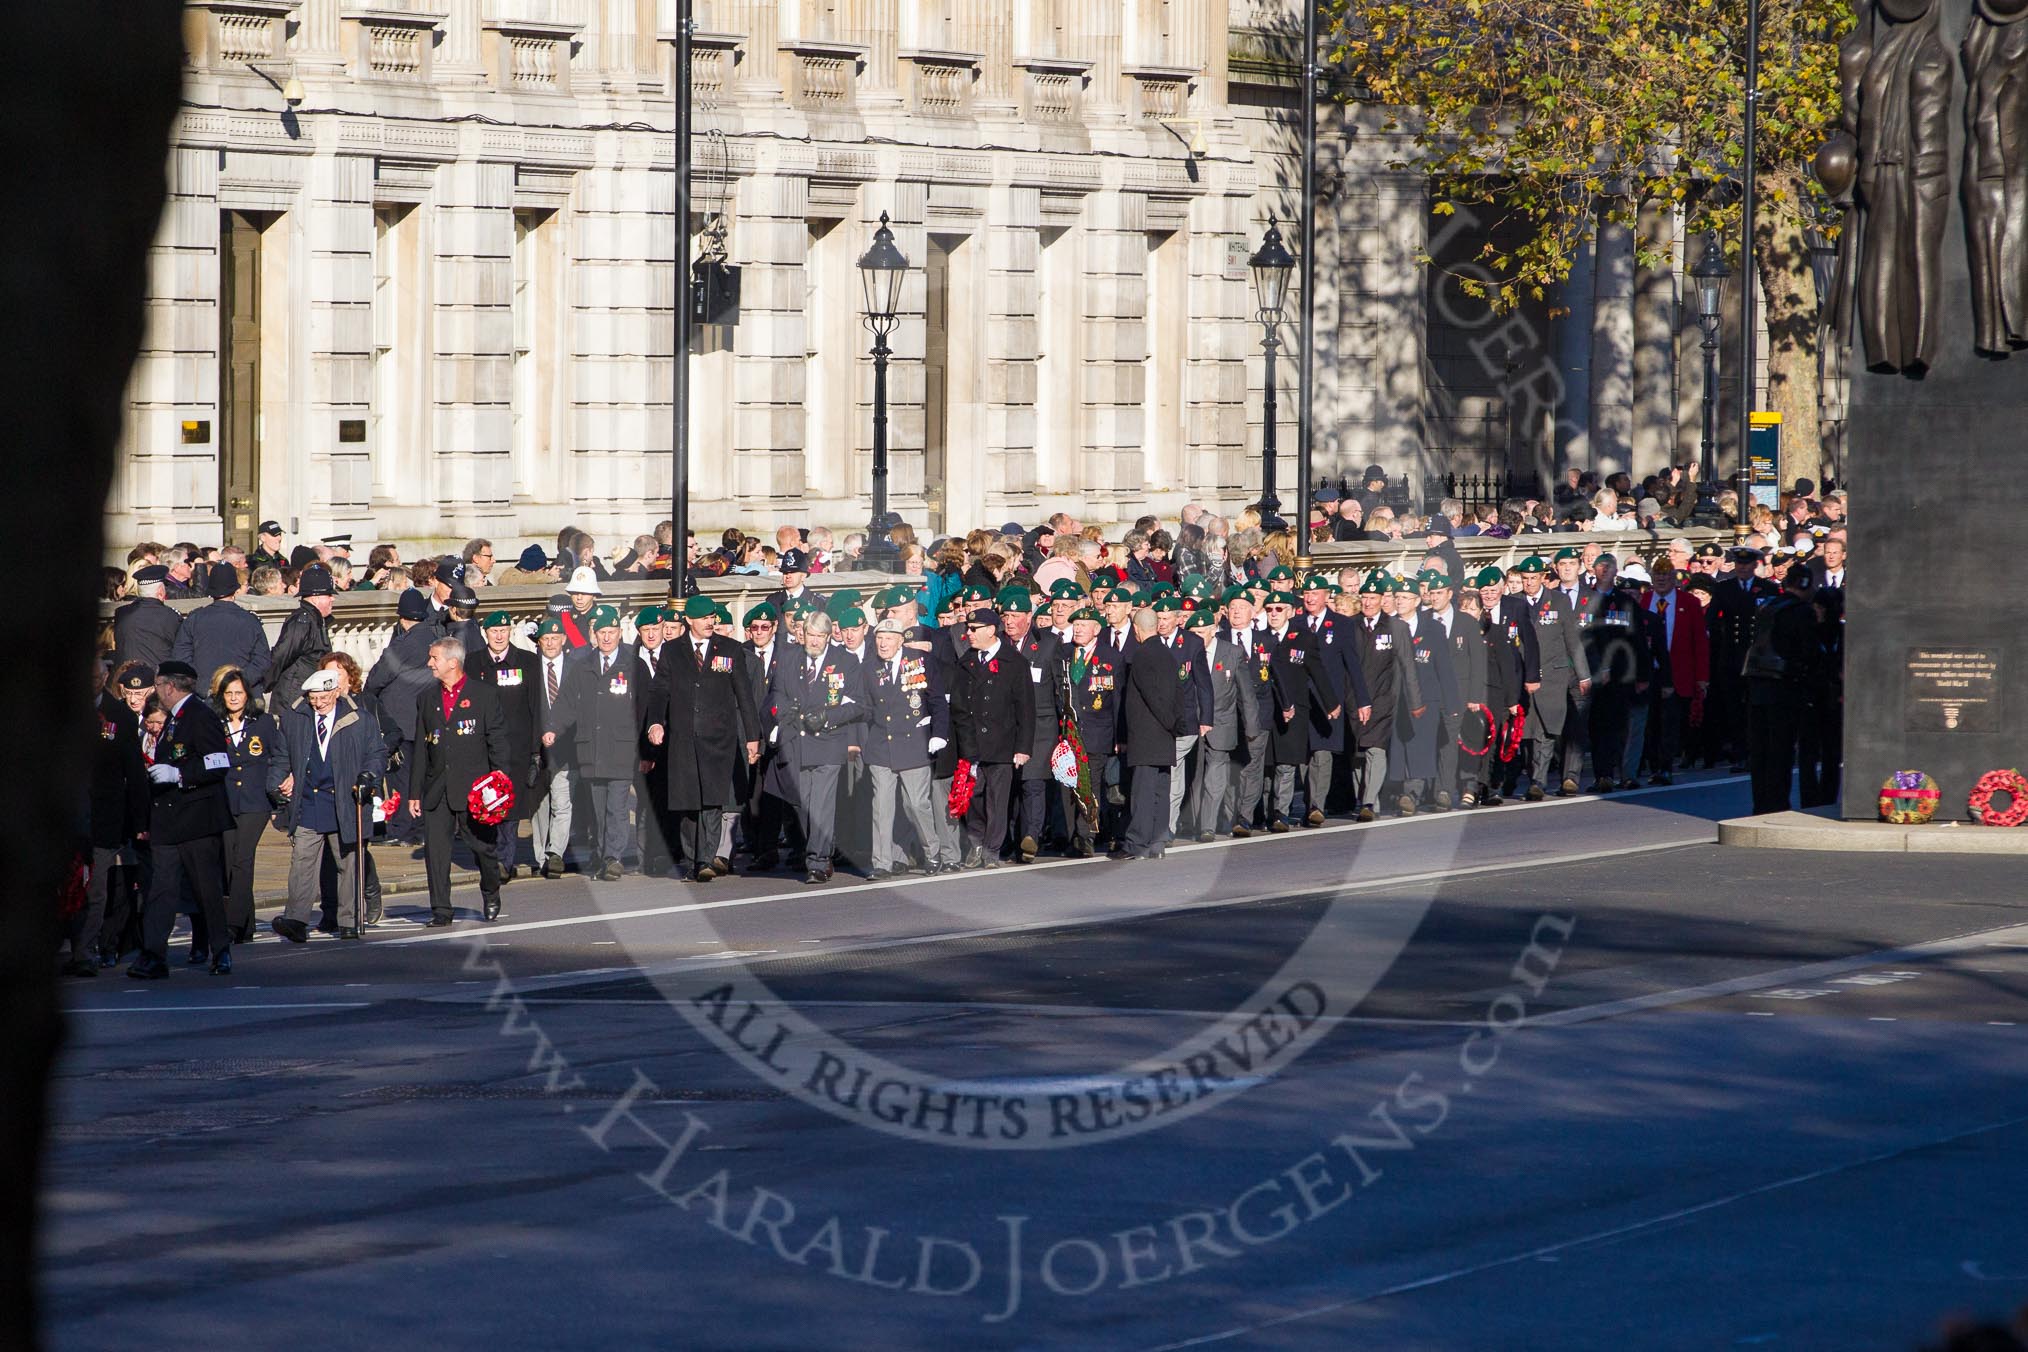 Columns of ex-Srevicemen and women, organized by the Royal British Legion, are moving forward towards the Cenotaph for the march past.